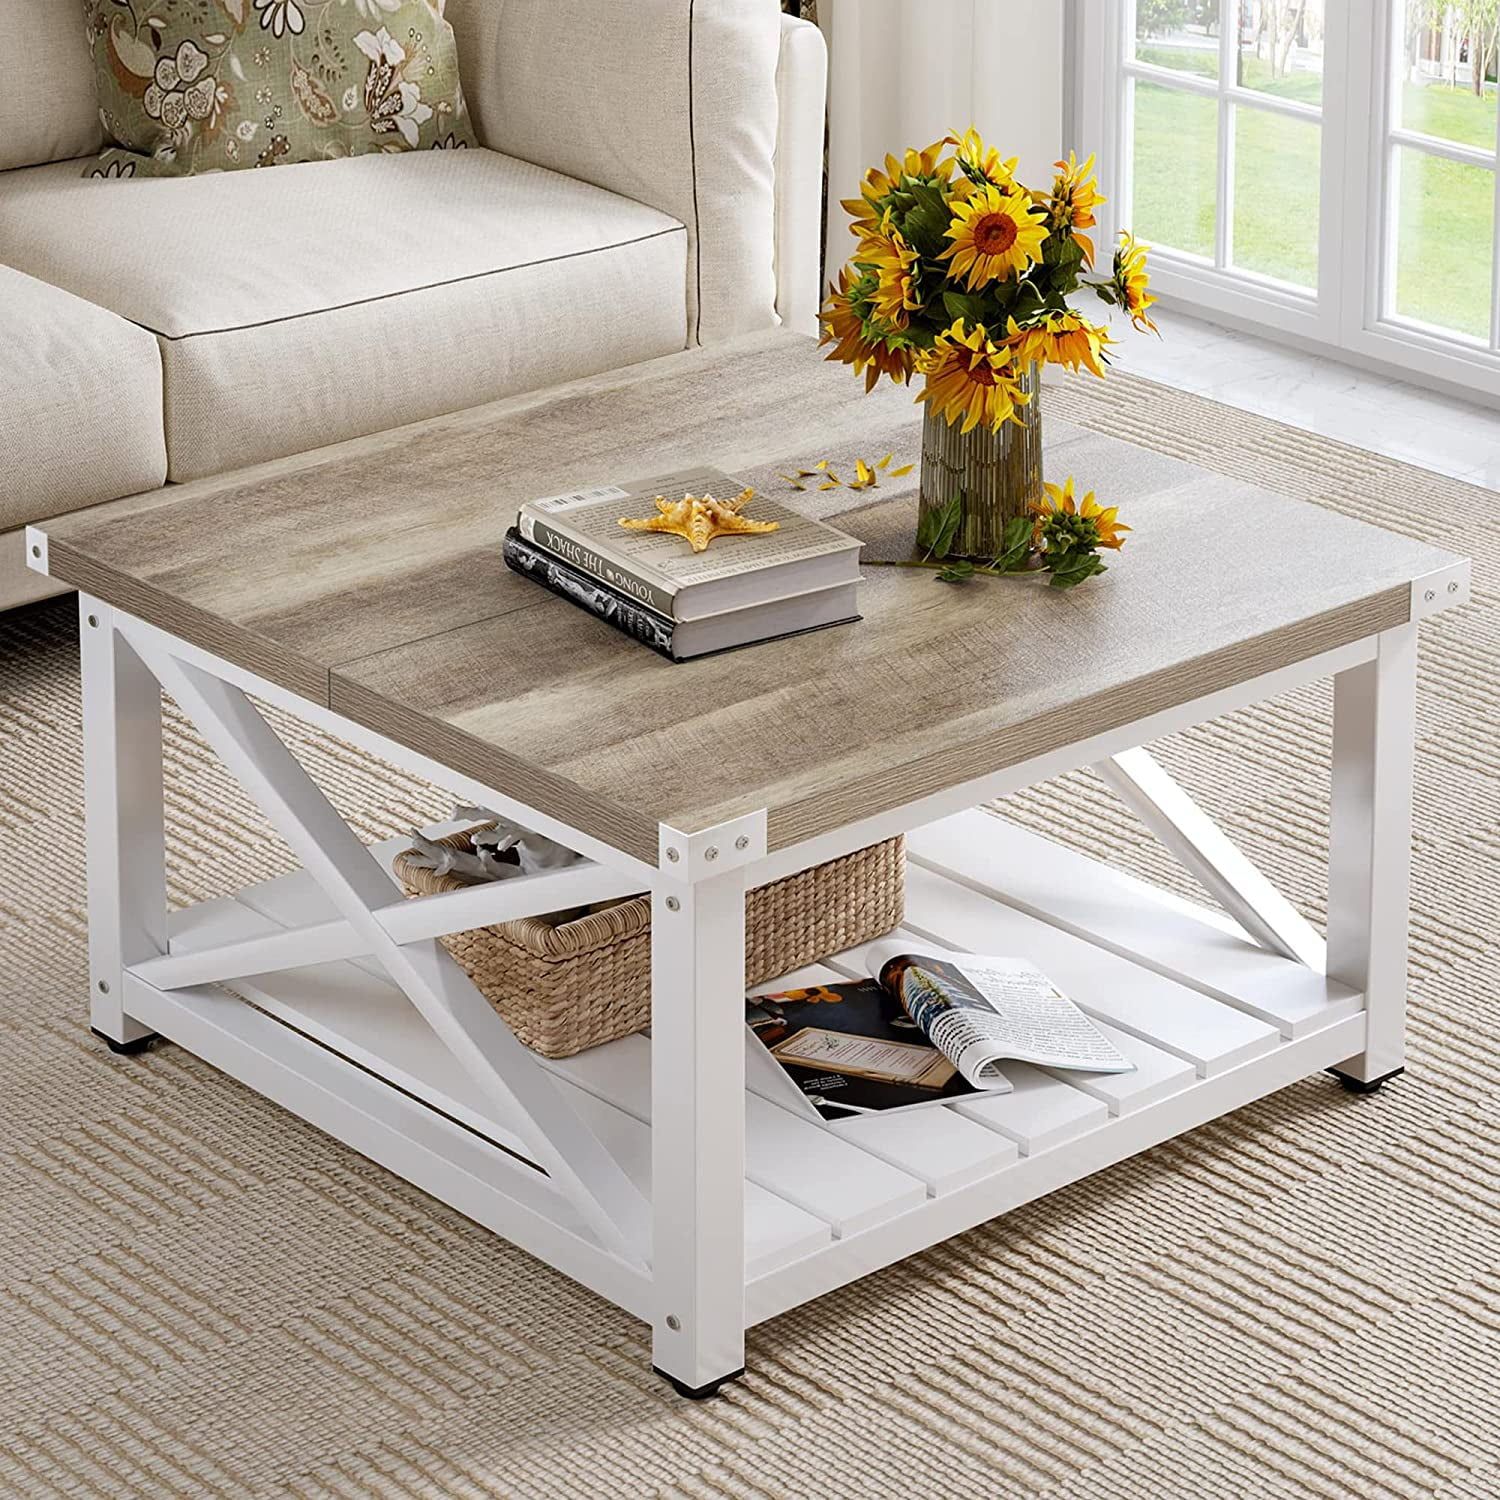 Dextrus Farmhouse Coffee Table For Living Room, Square Wood Coffee Table  With Open Storage Shelf – Walmart In Living Room Farmhouse Coffee Tables (View 7 of 15)